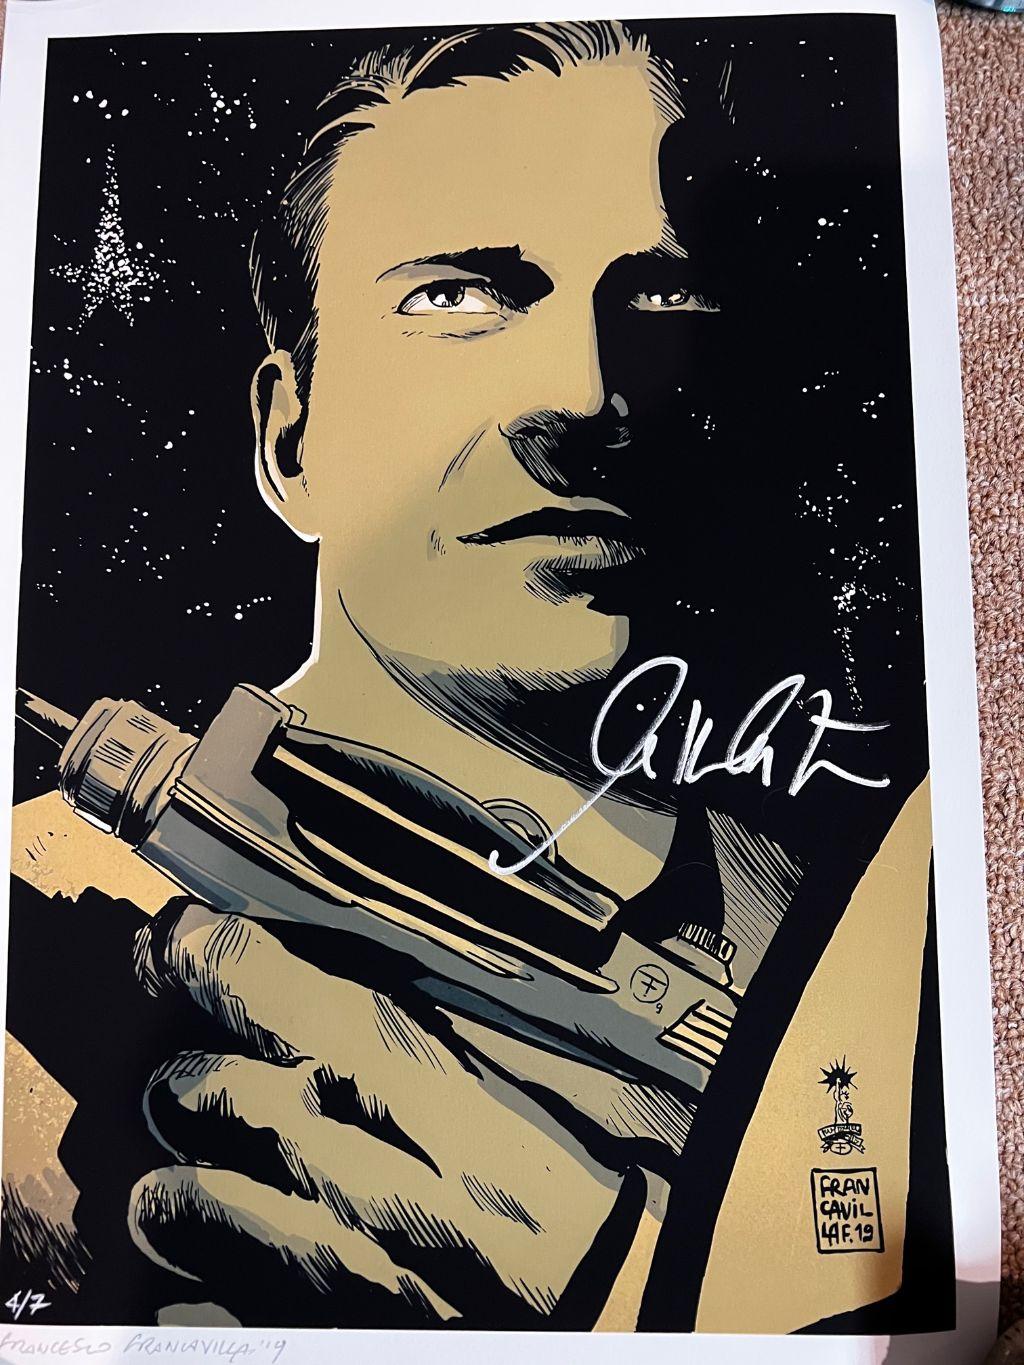 Exclusive Captain Kirk Artwork - Signed by Mr. Shatn...